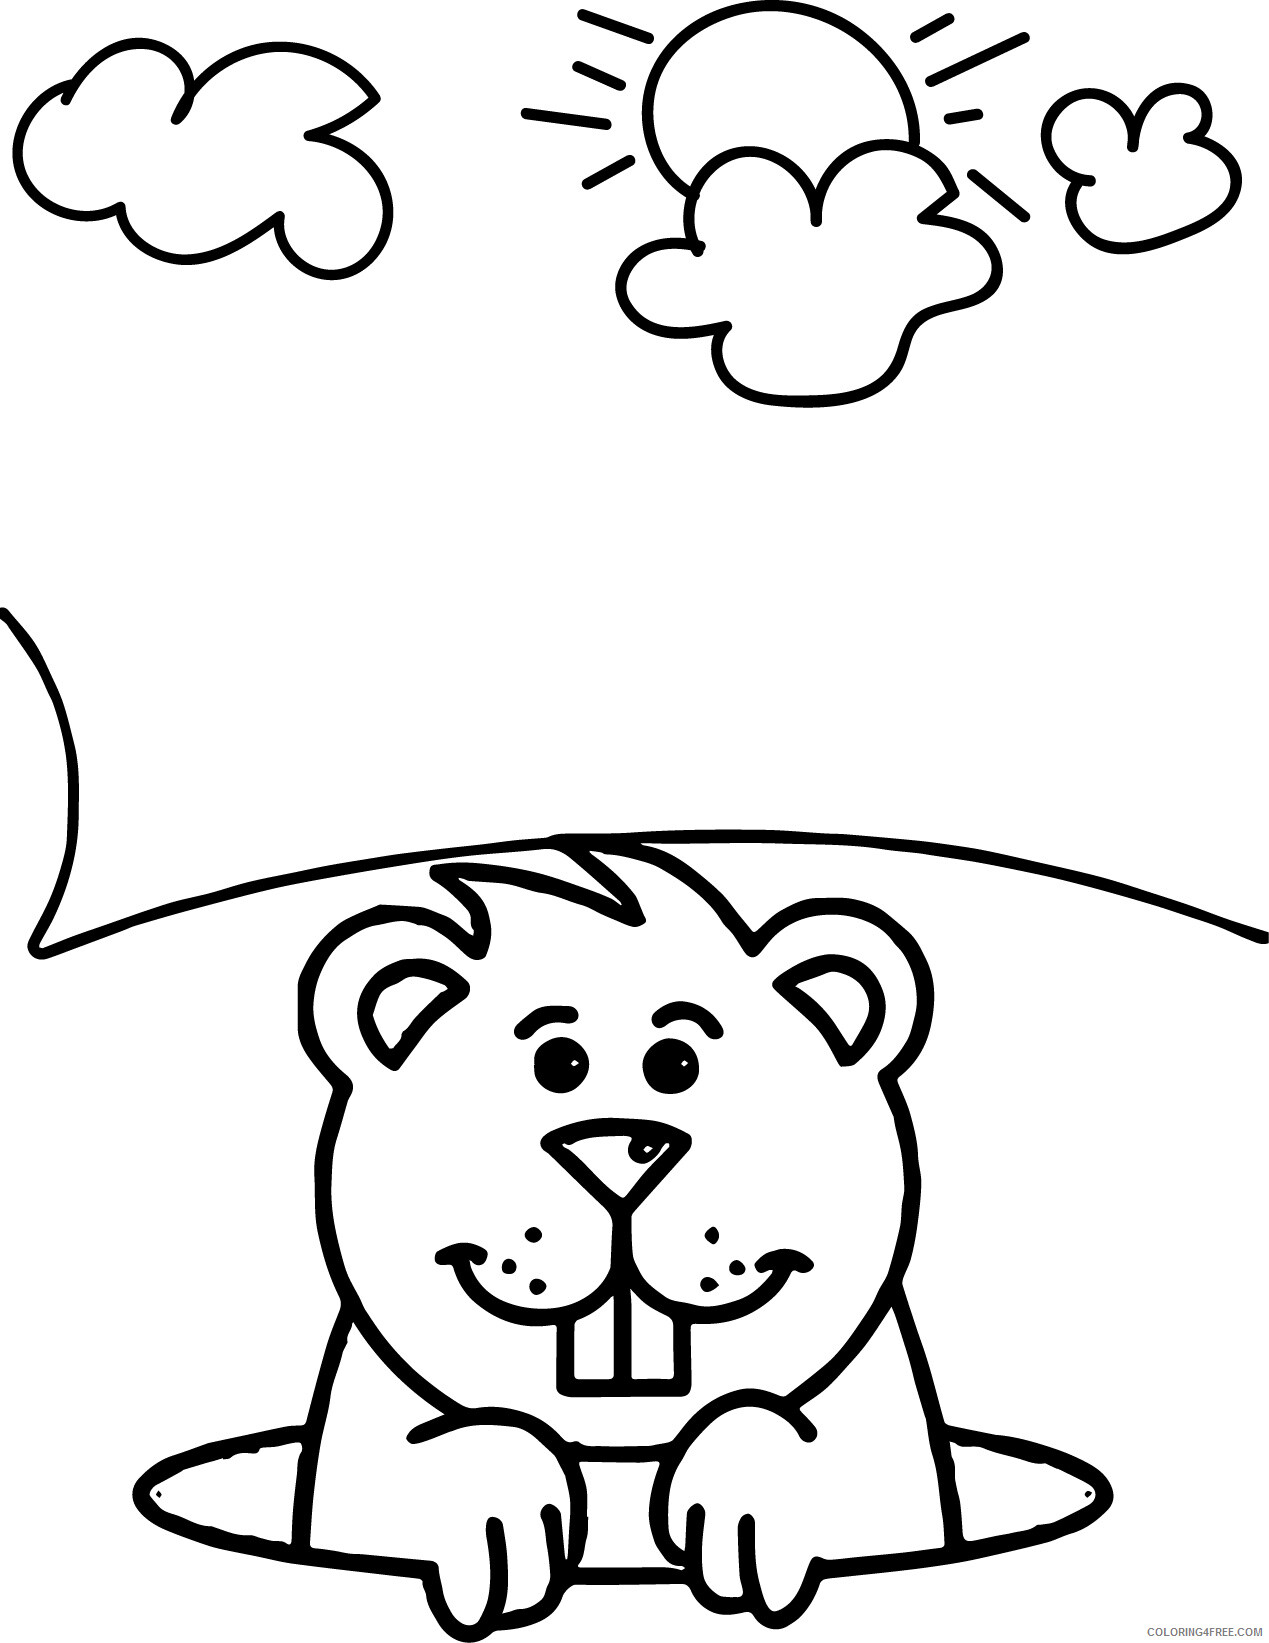 Groundhog Day Coloring Pages Holiday Print Free Groundhog Day Printable 2021 0587 Coloring4free